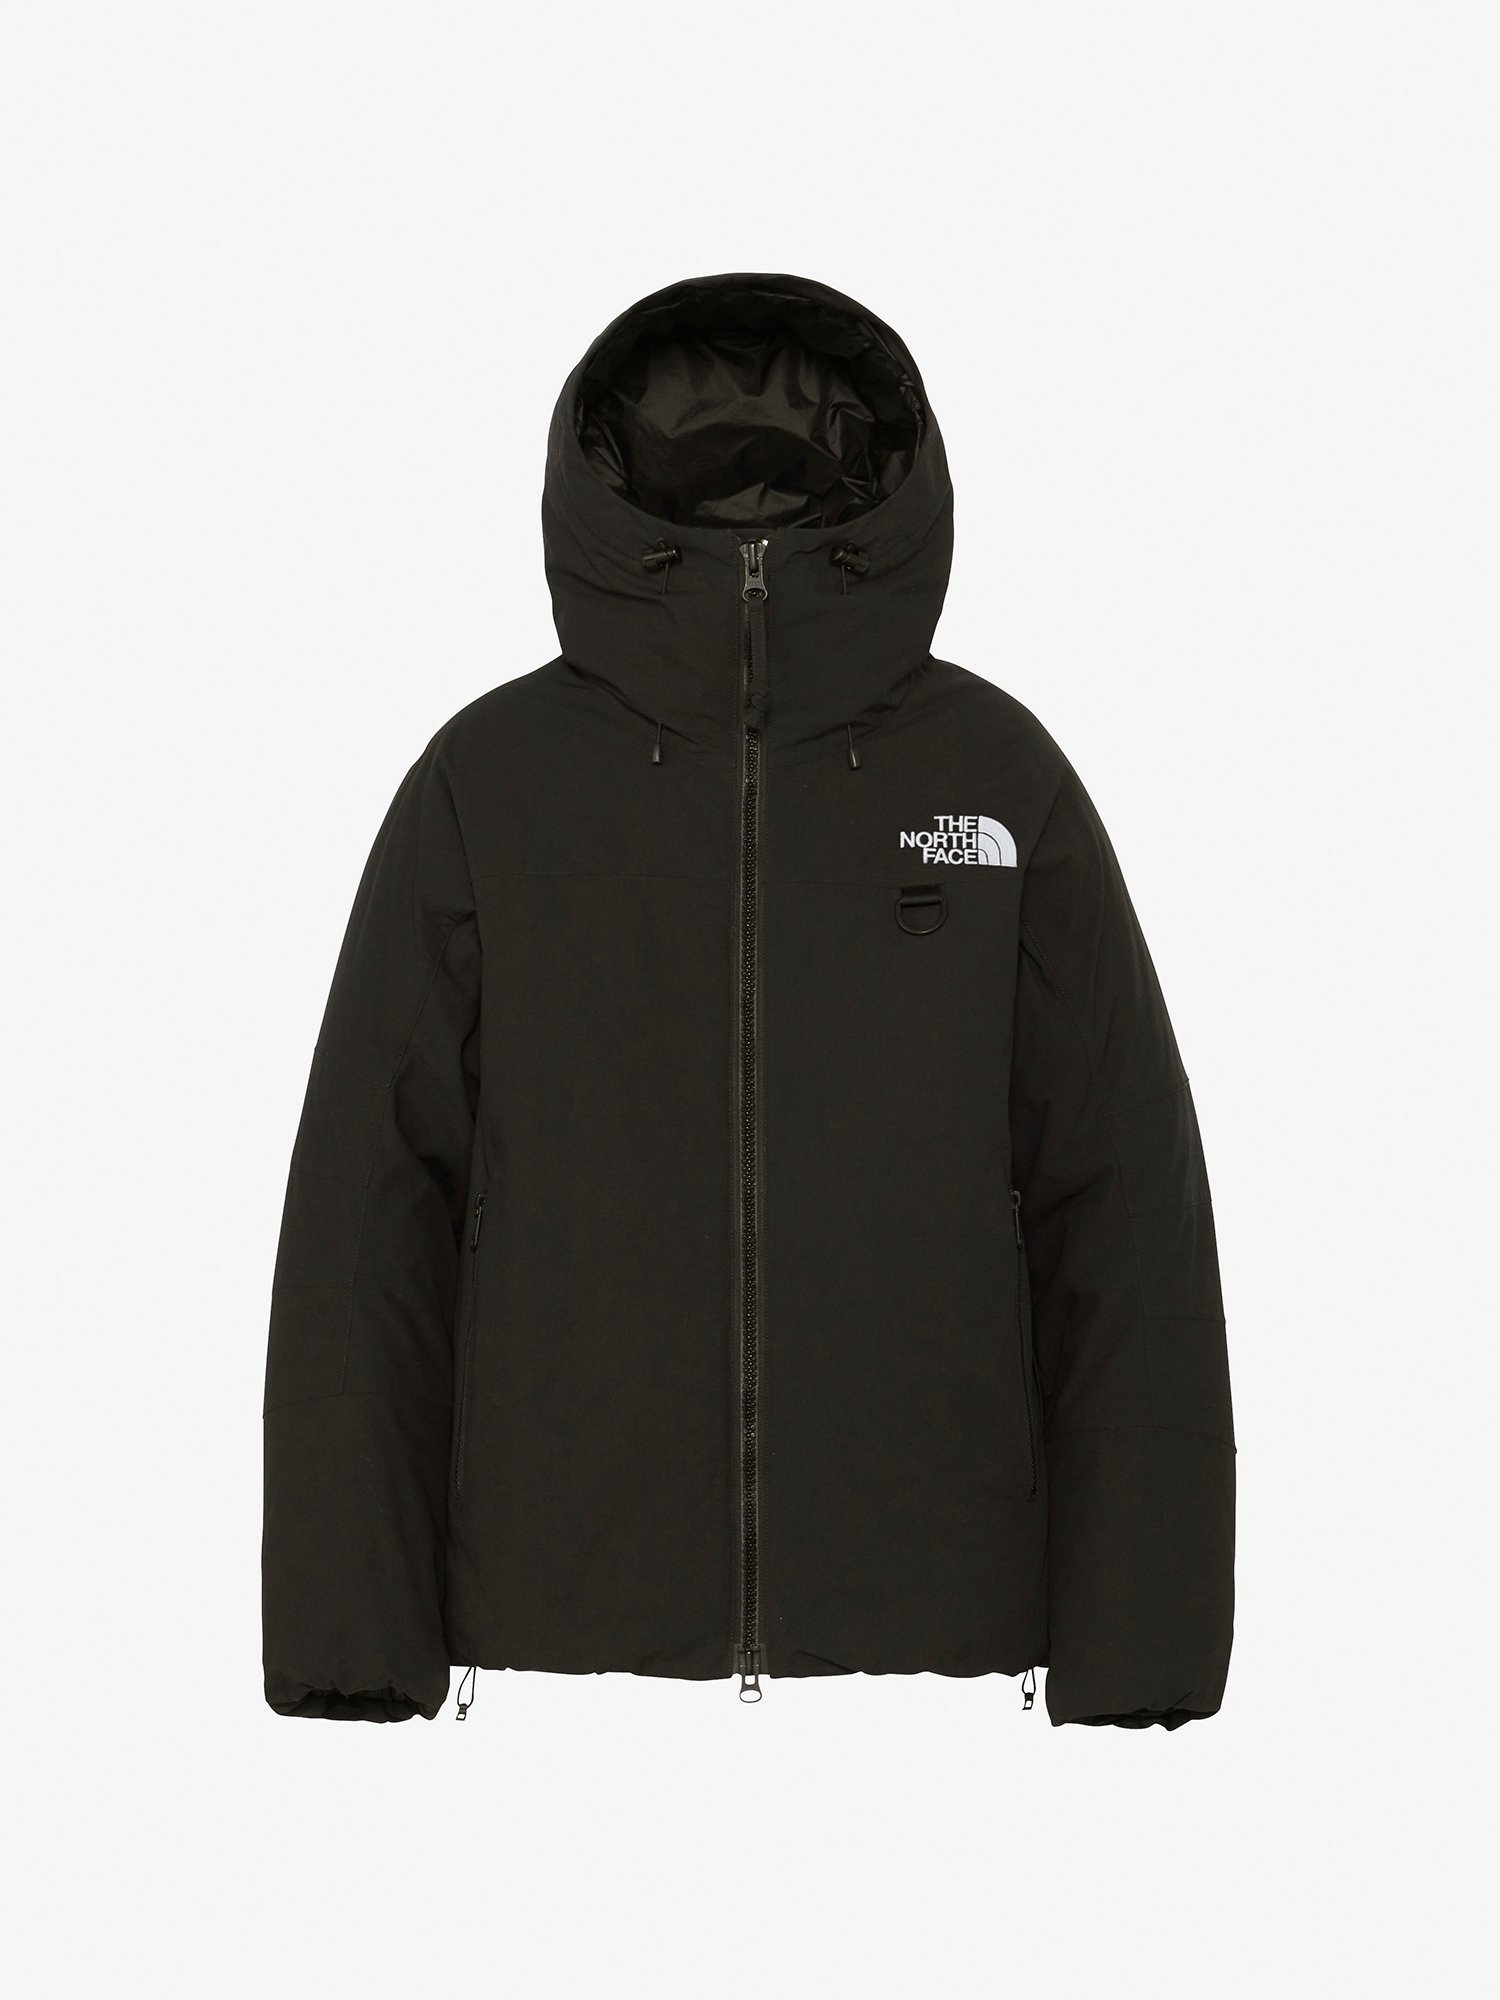 THE NORTH FACE ファイヤー